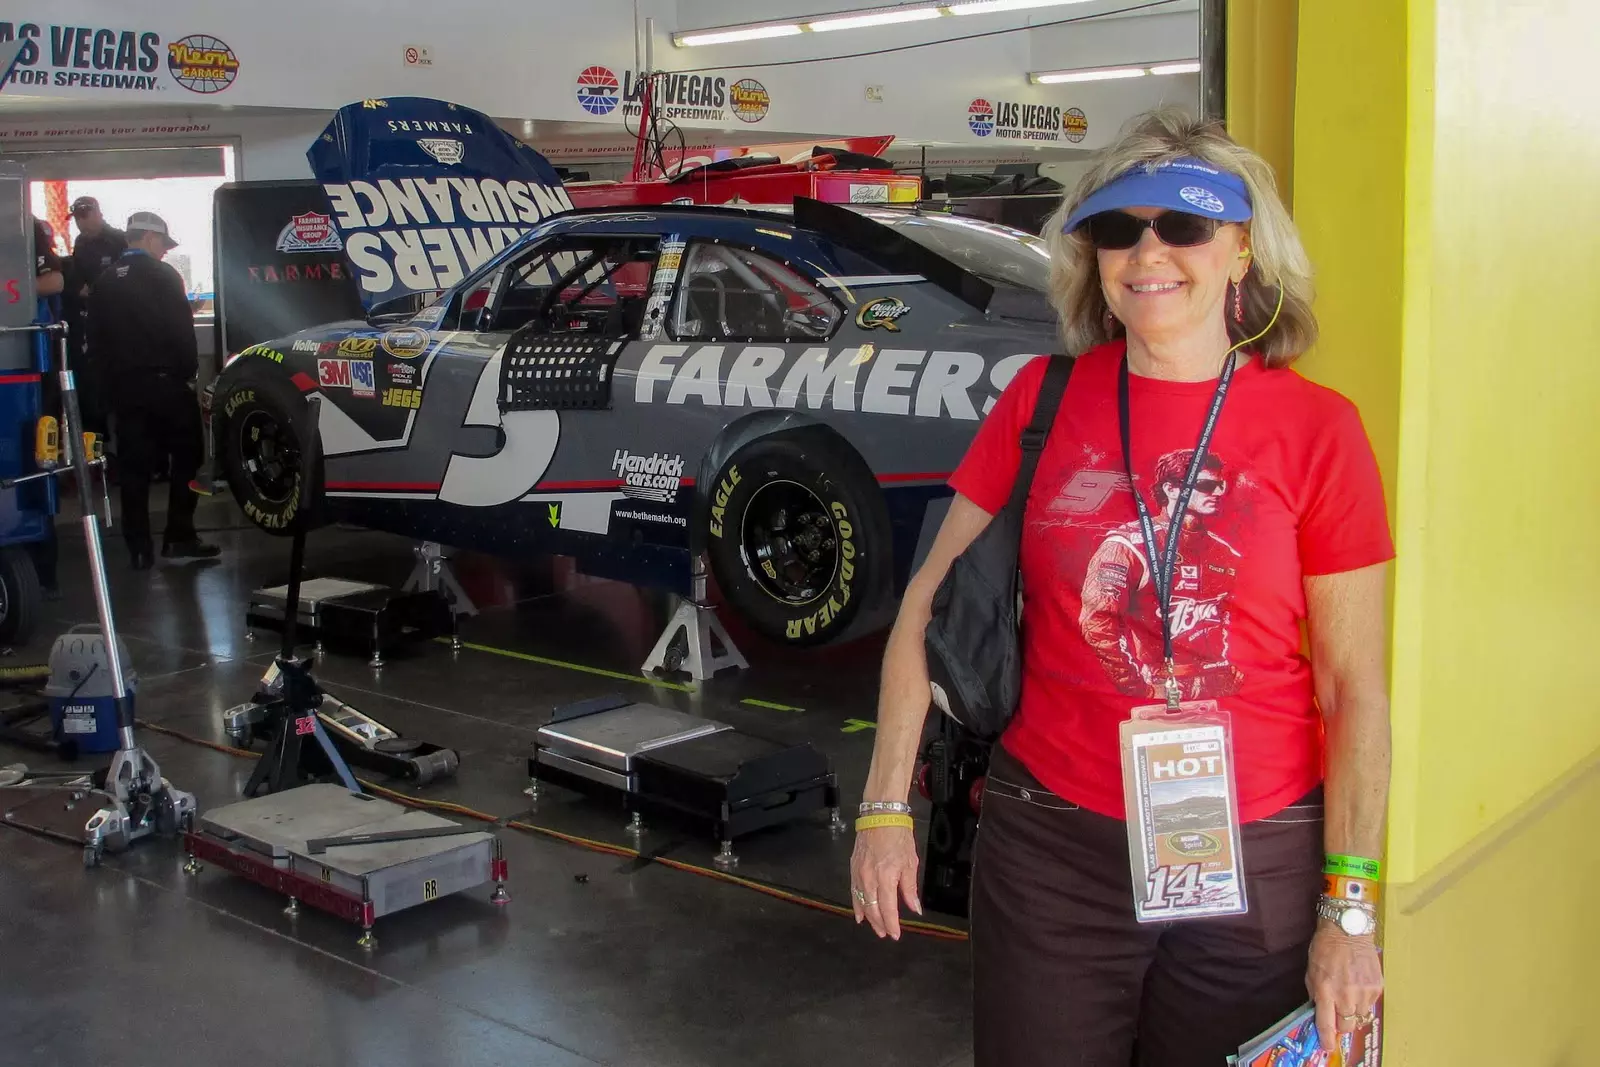 Cancer hero Judi Carlson standing in front of a NASCAR garage.